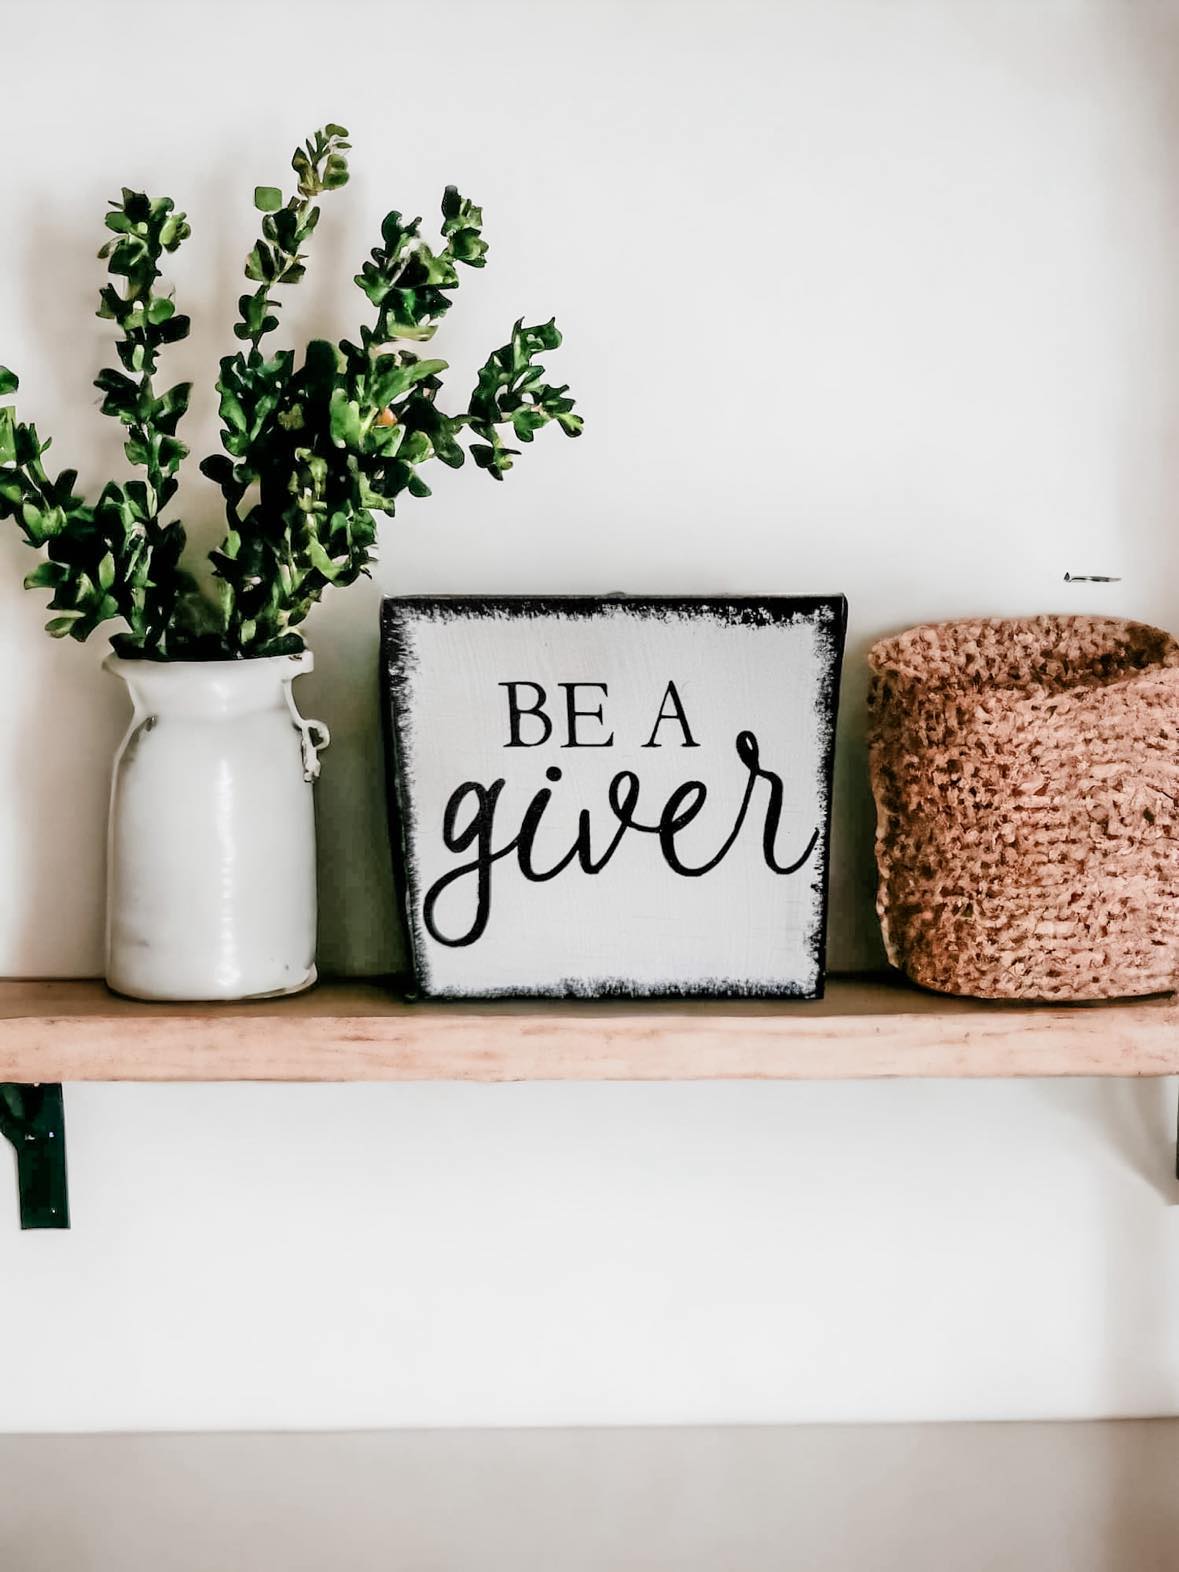 Be a Giver" Wood Block Sign: Hand-painted black text on white background with rustic black brush strokes border, 4.5"x4.5". Perfect for inspiring kindness.